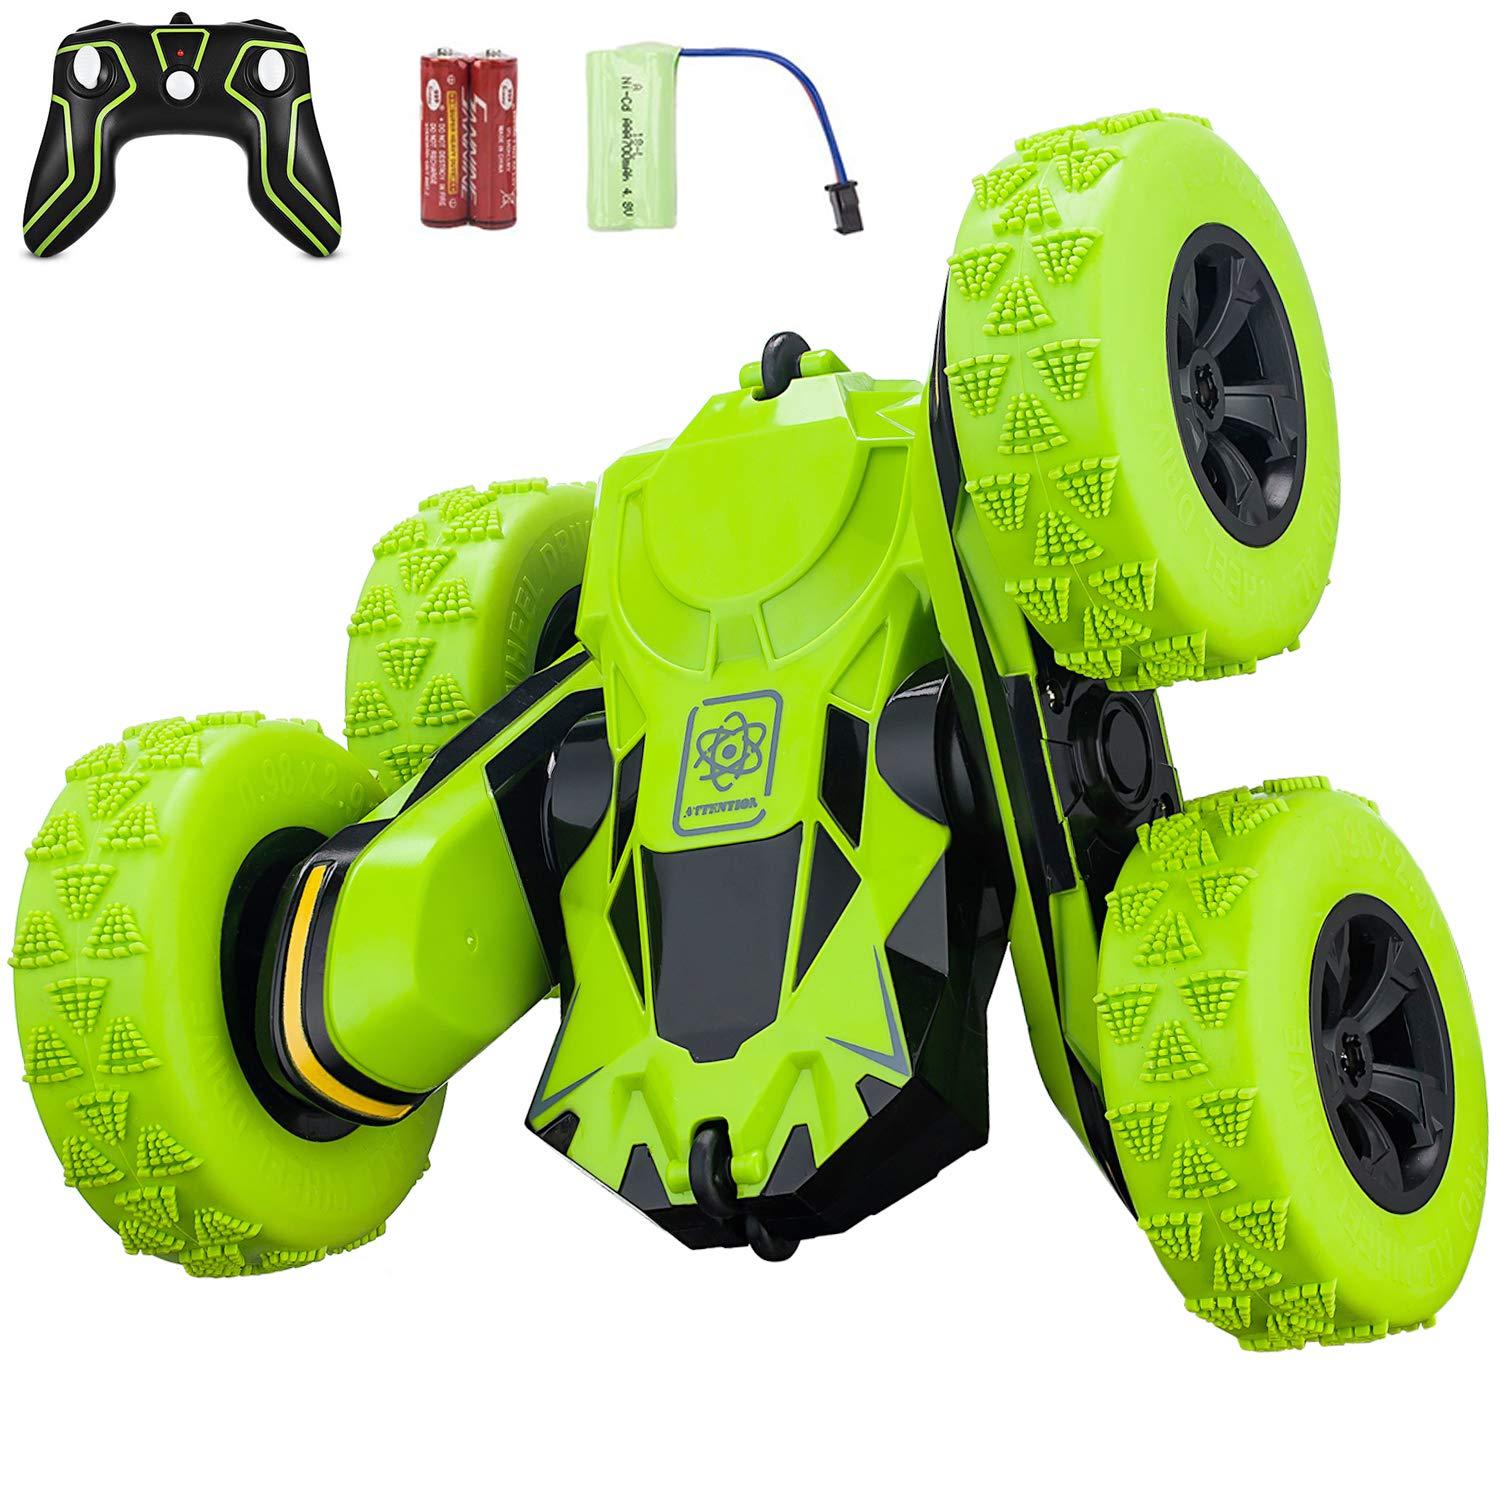 Remote Control Car With Wristband: It's not just for kids - adults can also enjoy the fun and benefits of a remote control car with a wristband.